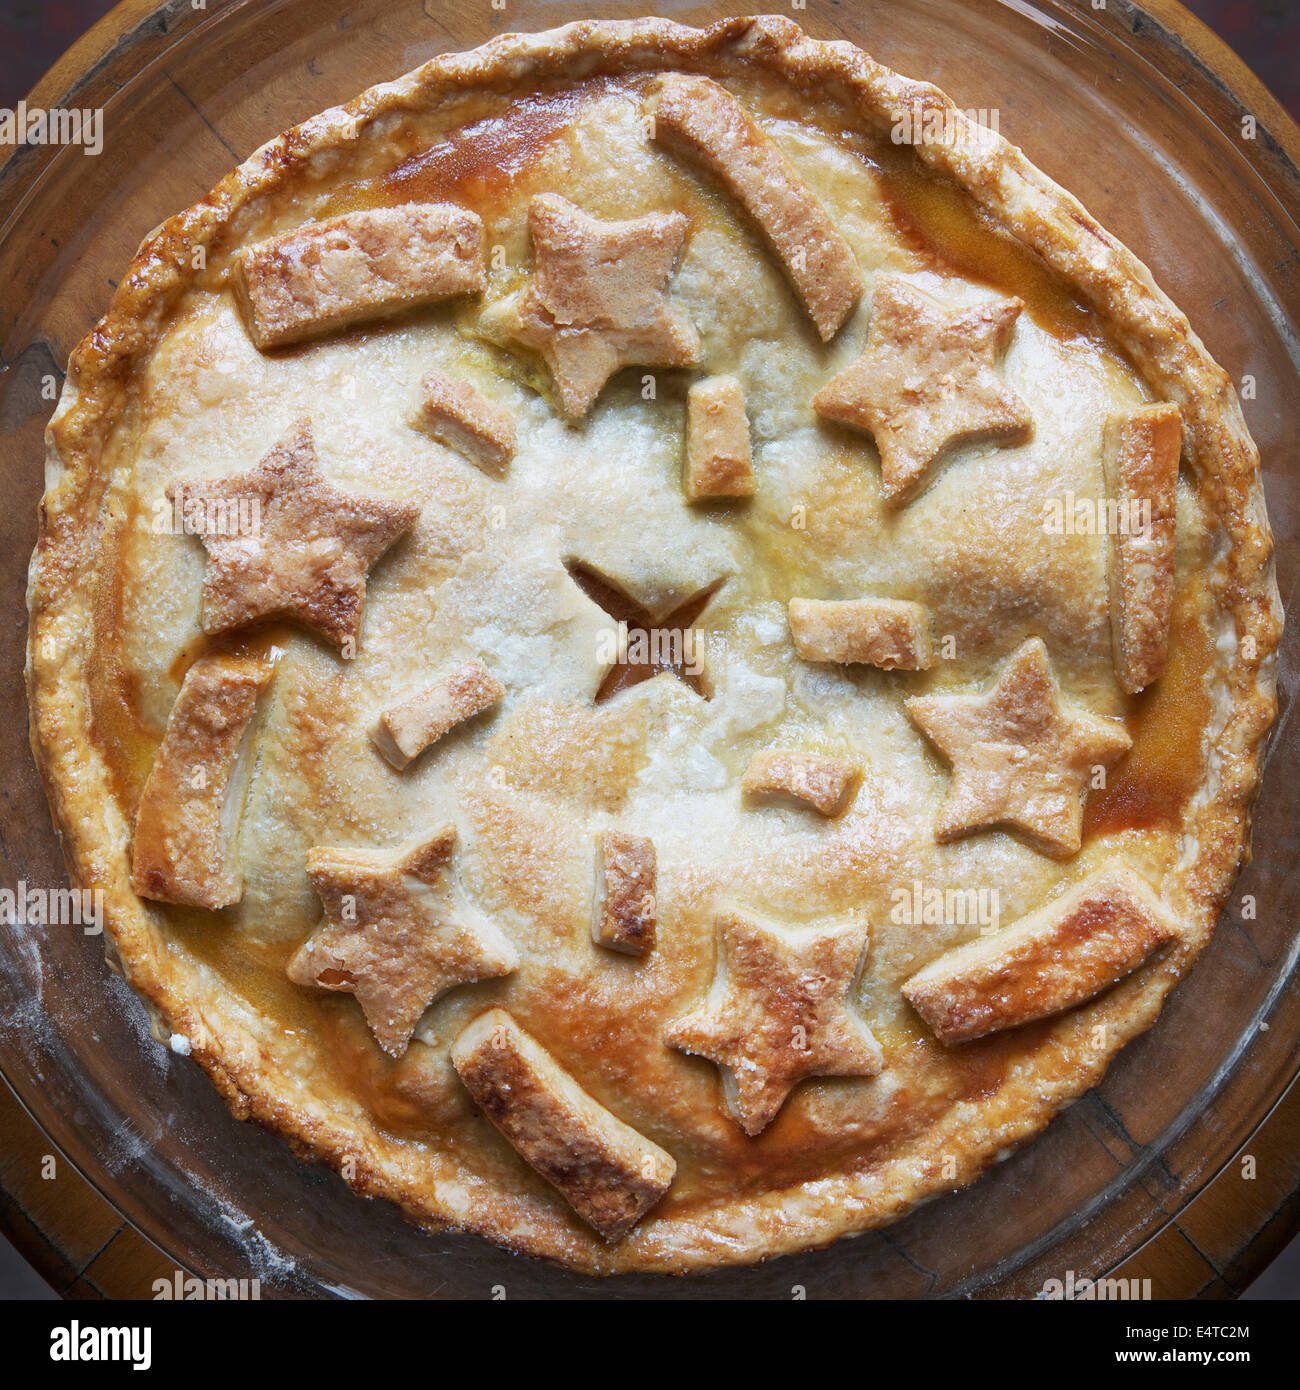 Overhead view of freshly baked apple pie with star shaped cut-outs on top, studio shot Stock Photo